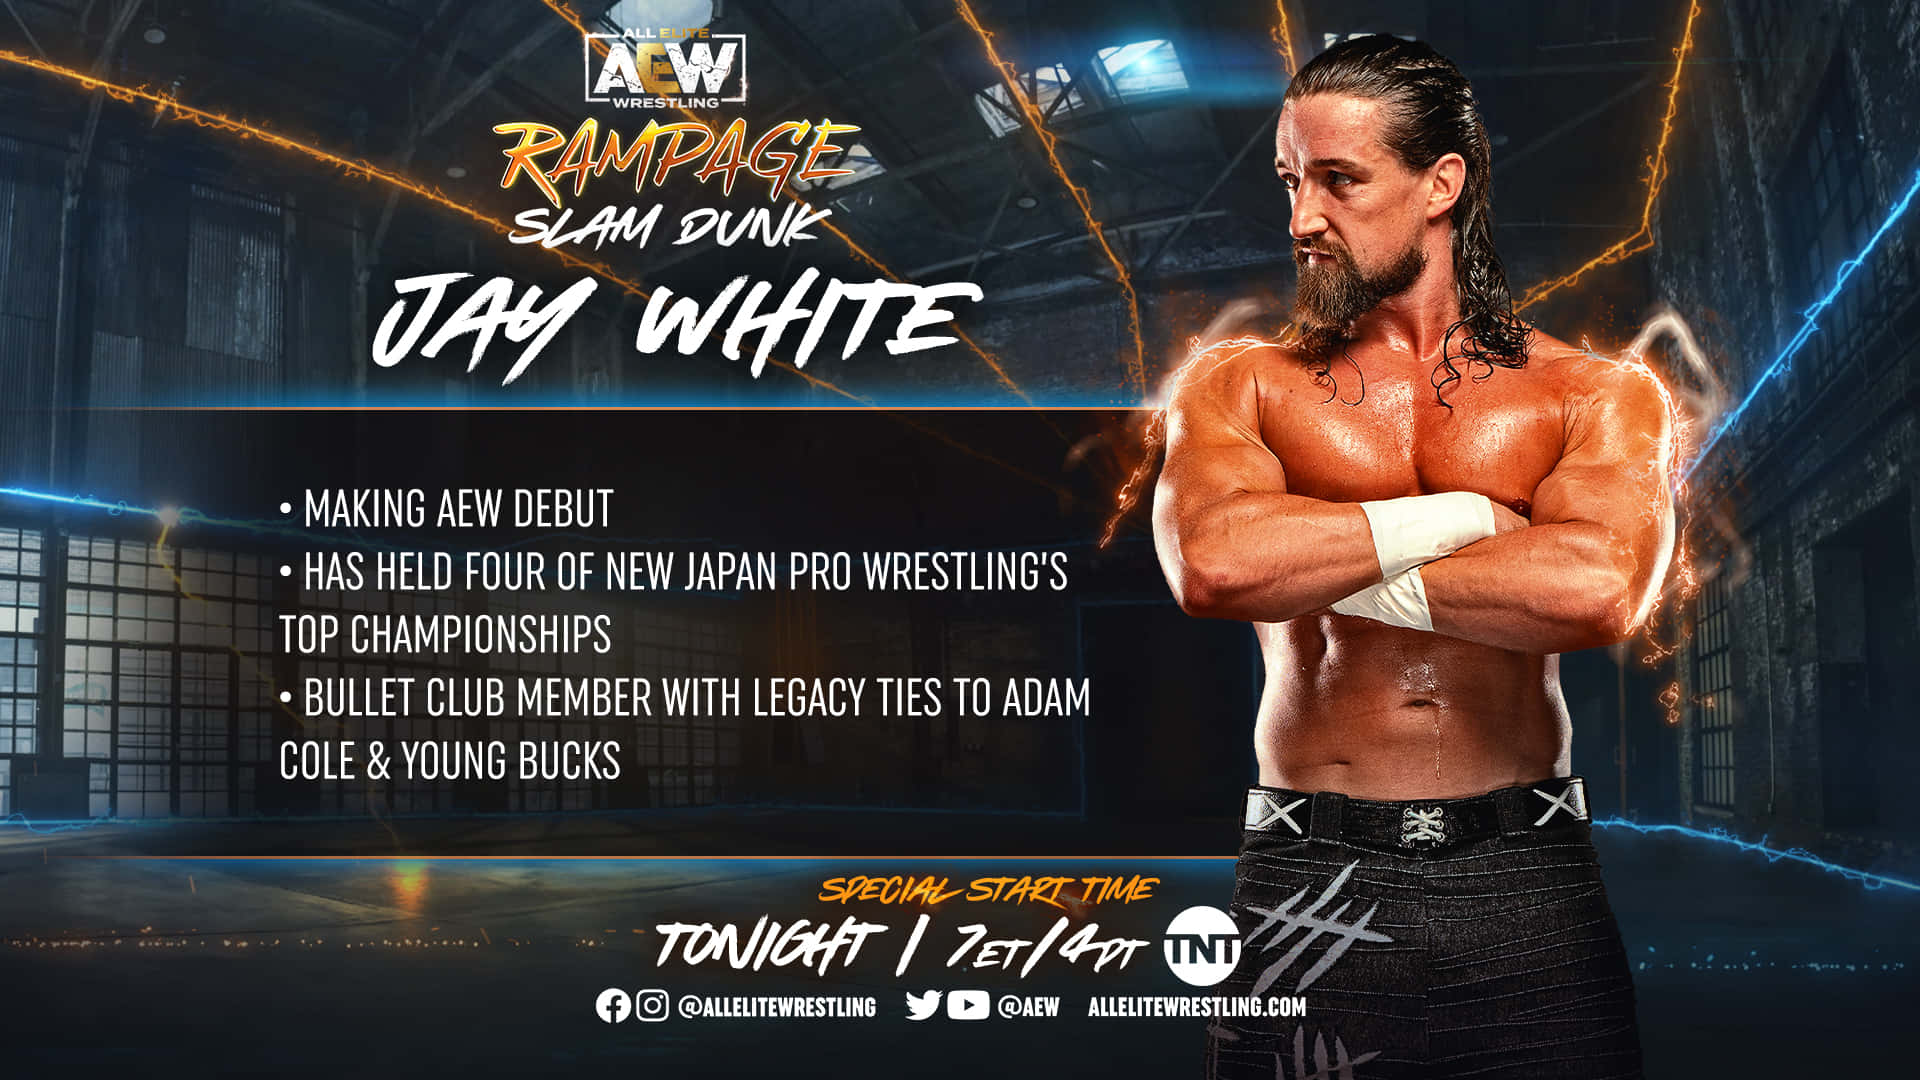 Jay White Aew Rampage Slam Dunk Picture